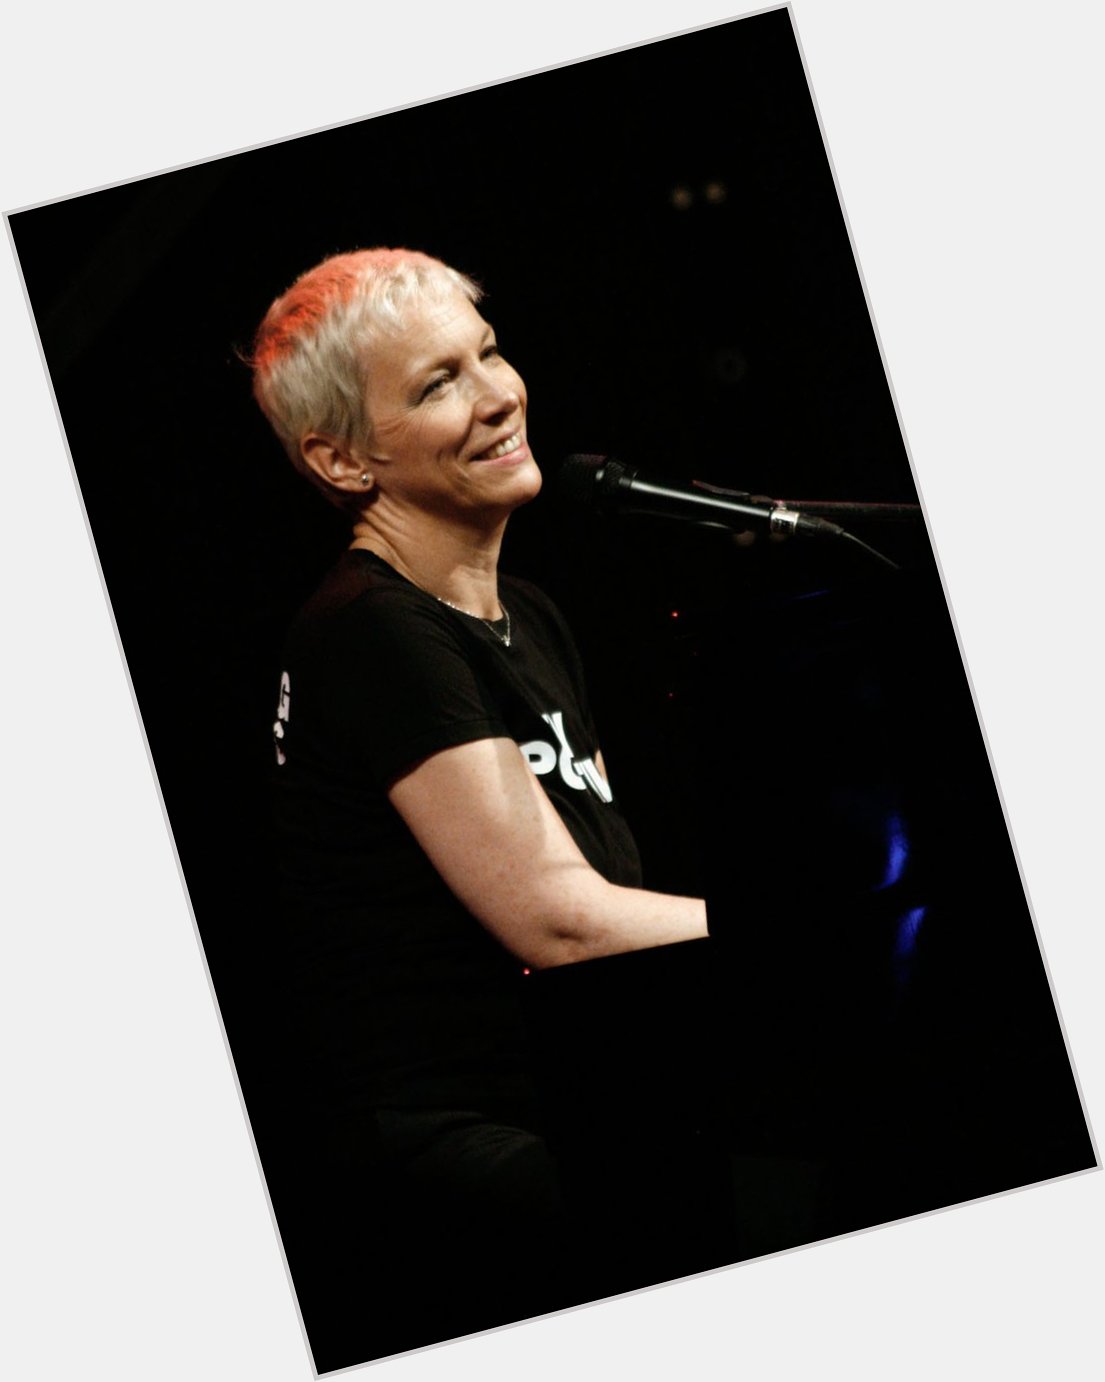 Happy Birthday to singer, Chancellor for GCU, songwriter and activist Annie Lennox born on December 25, 1954 